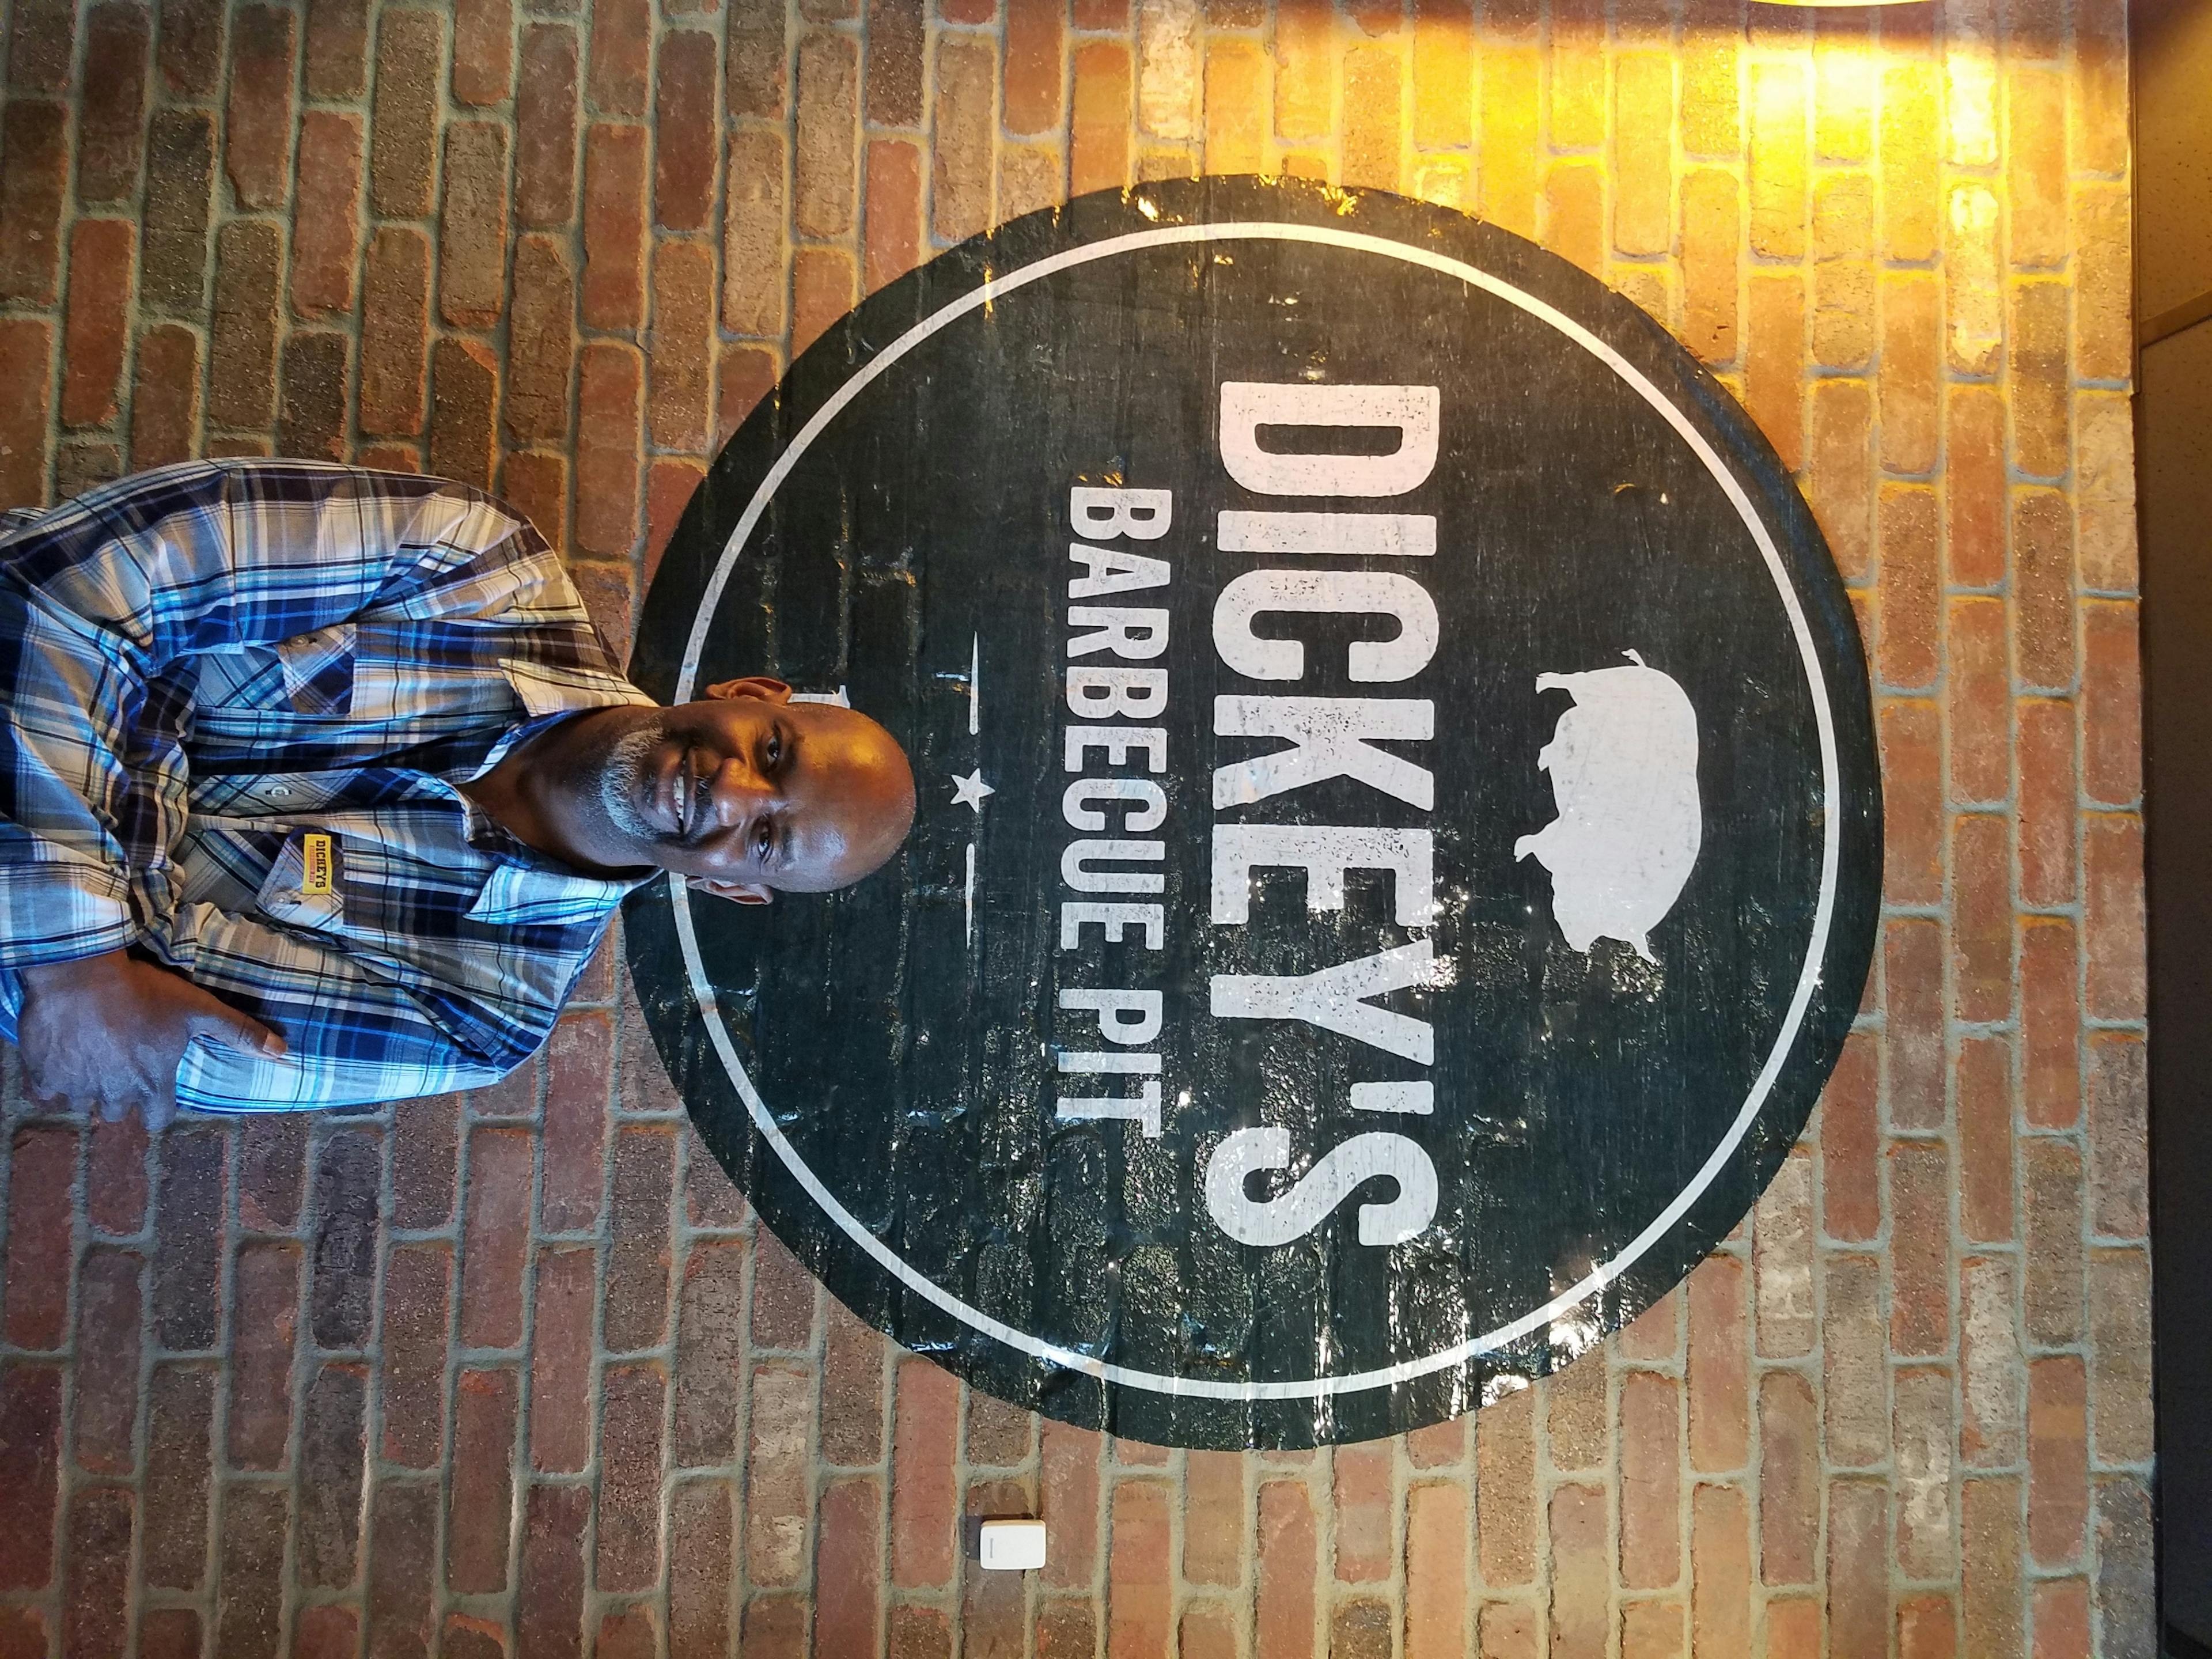 Dickey’s Barbecue Pit Serves Texas-style Barbecue in St. Paul, MN